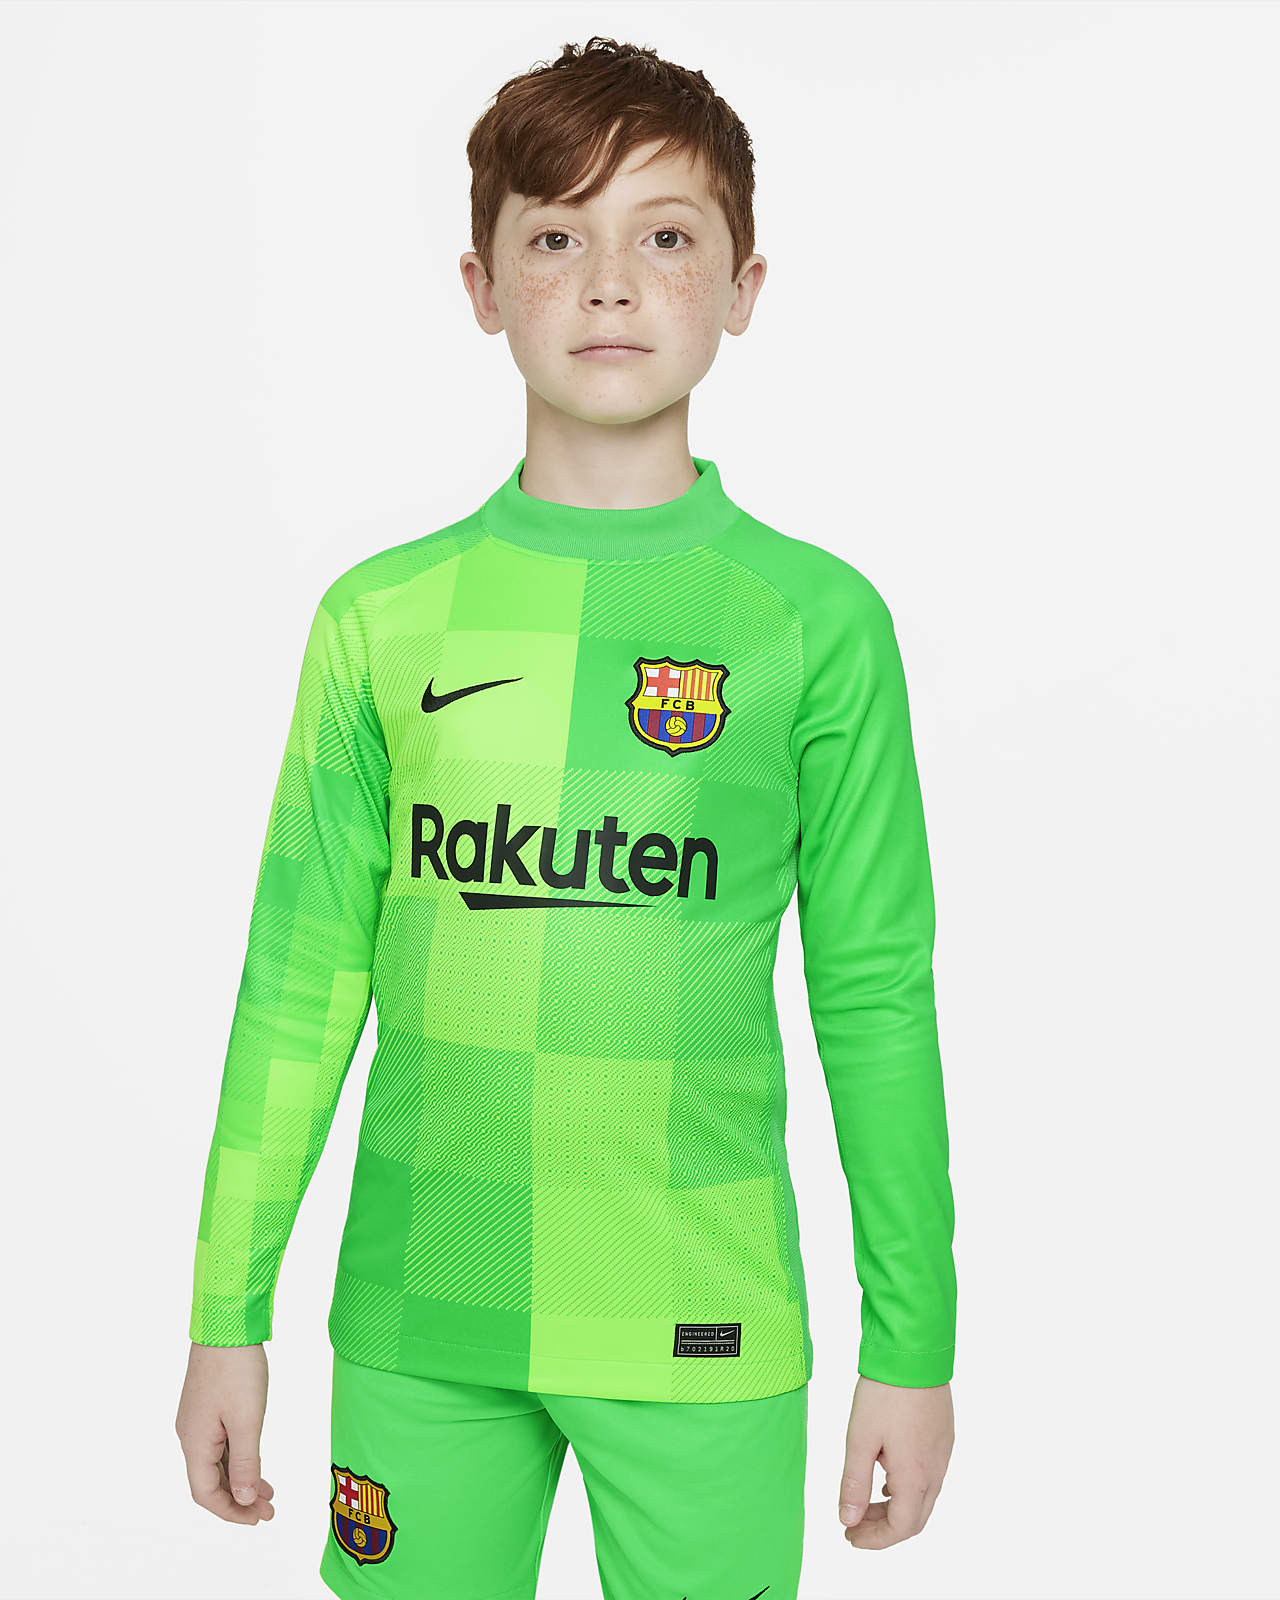 Buy Nike Green Little Kids Long Sleeved Top and Jersey Leggings Set from  Next Luxembourg